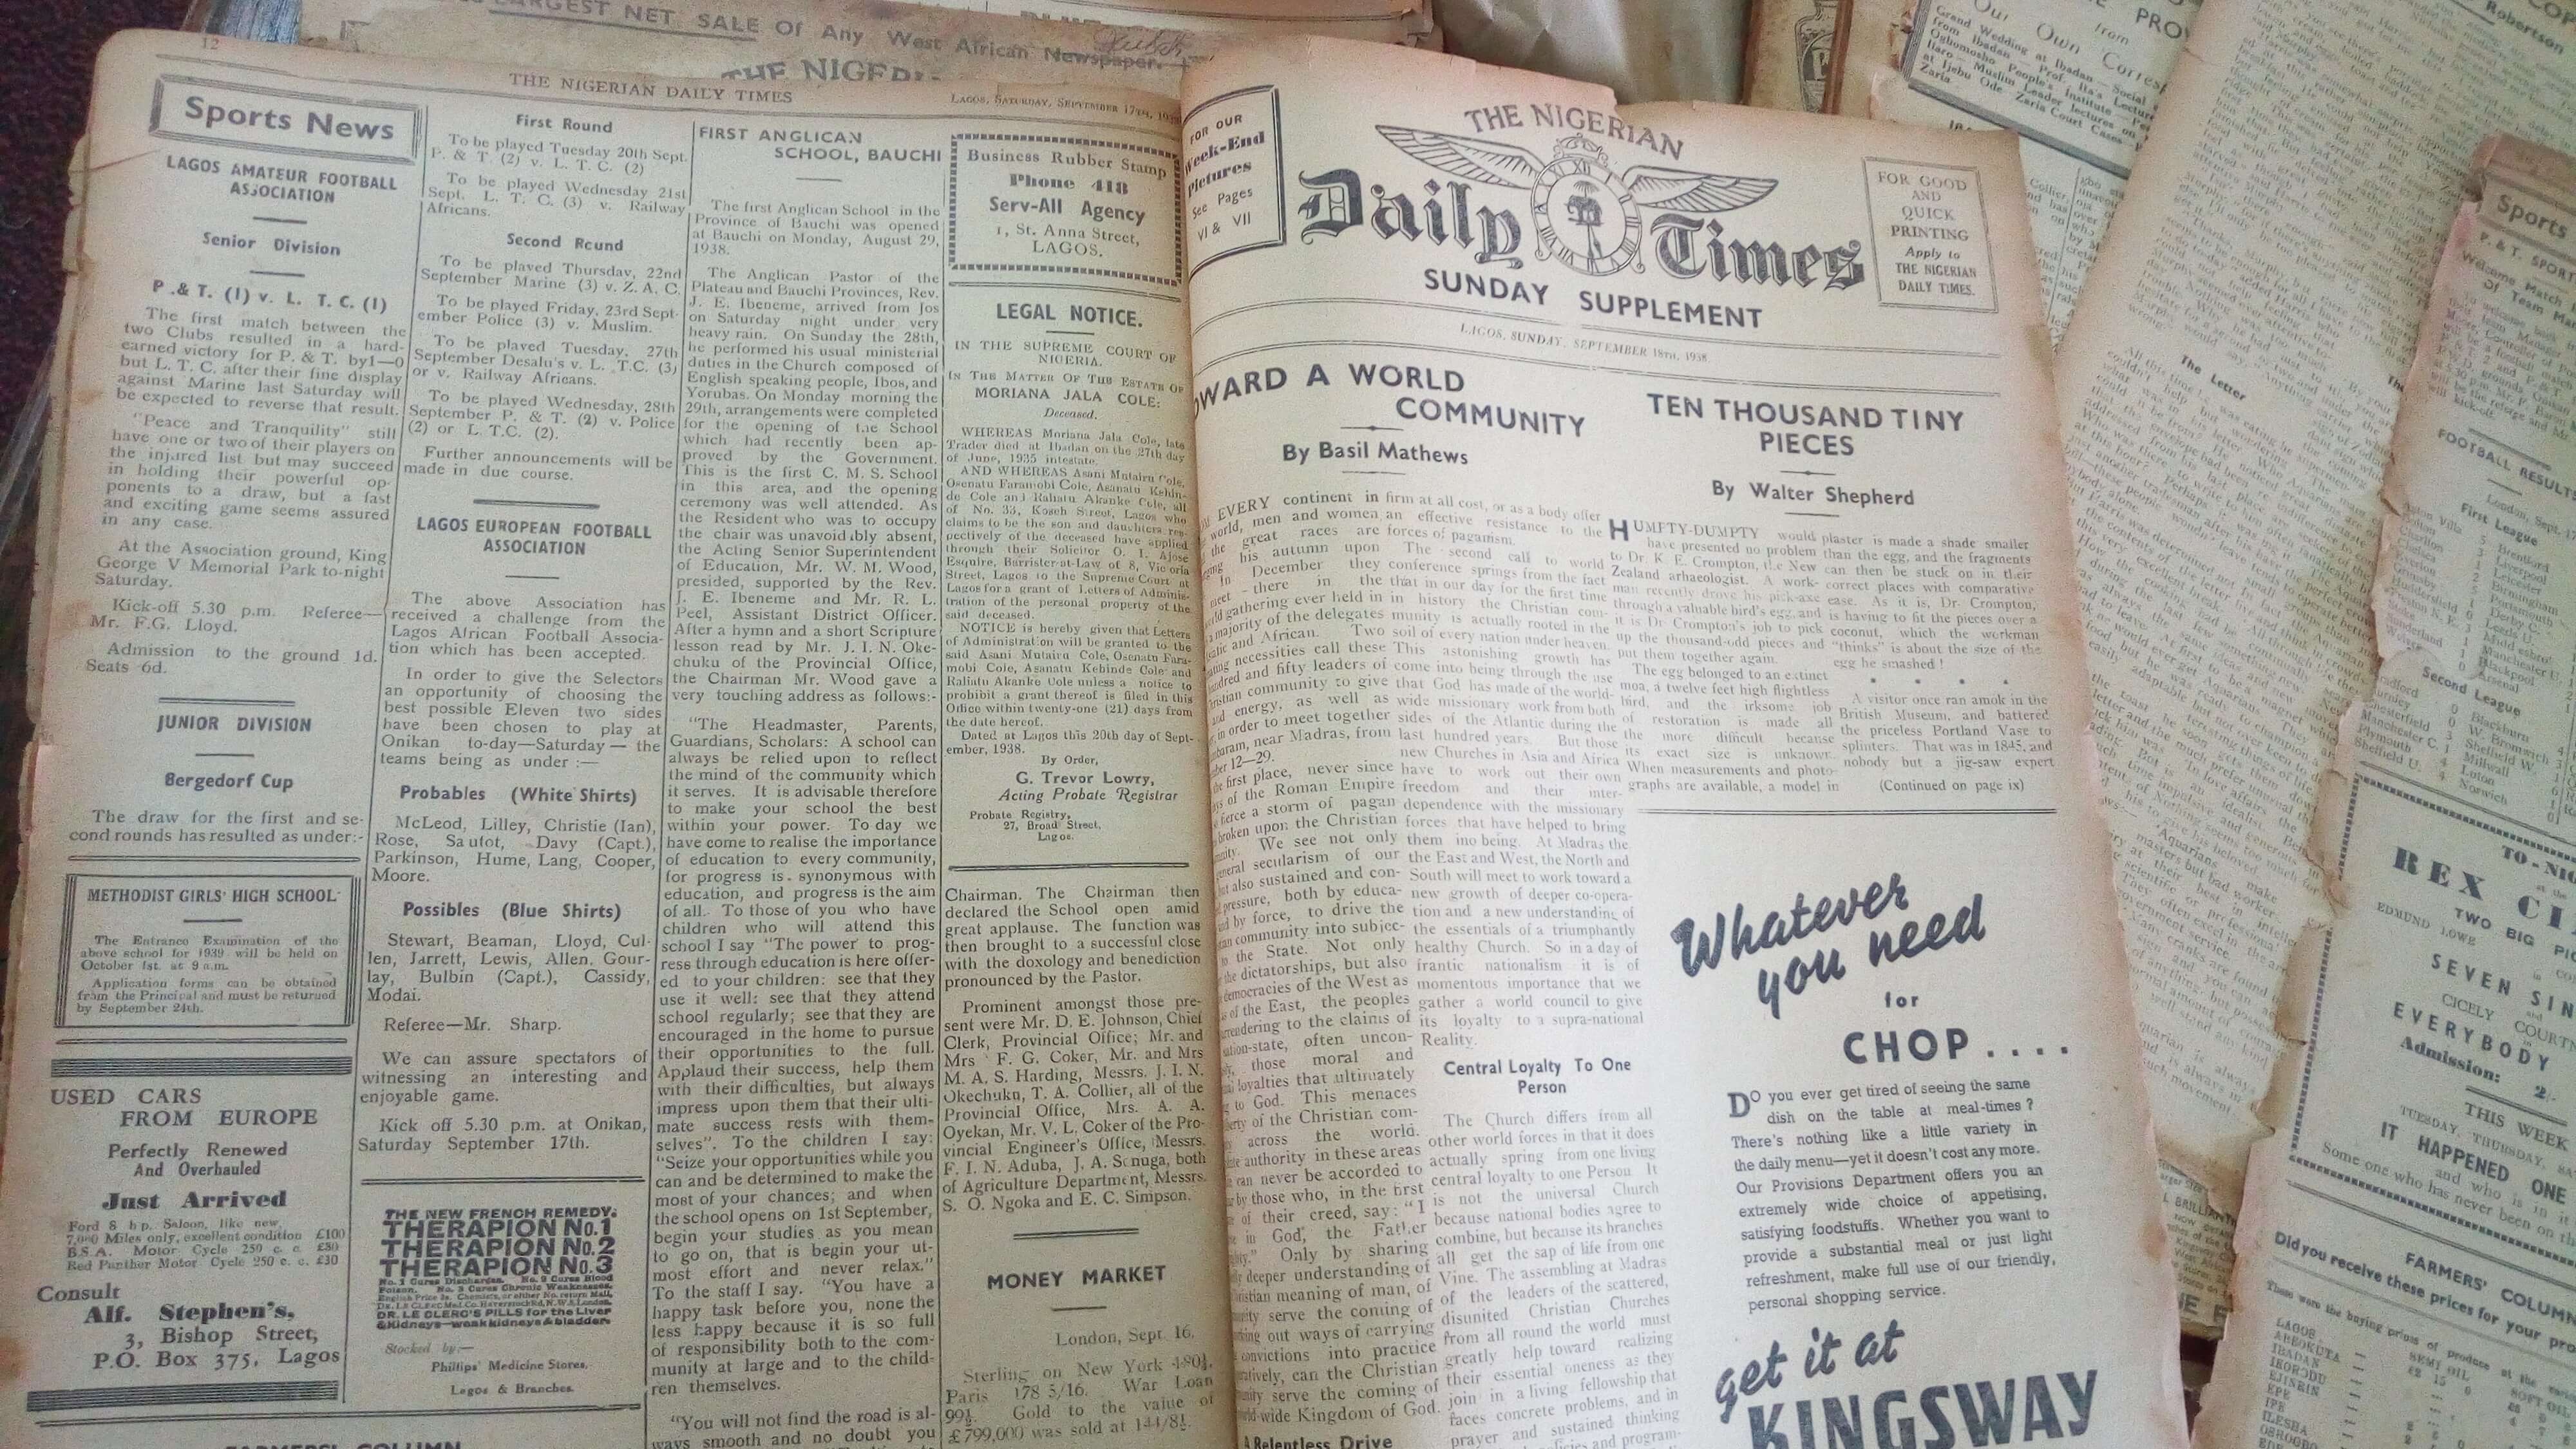 The Nigerian Daily Times of September 18th, 1938